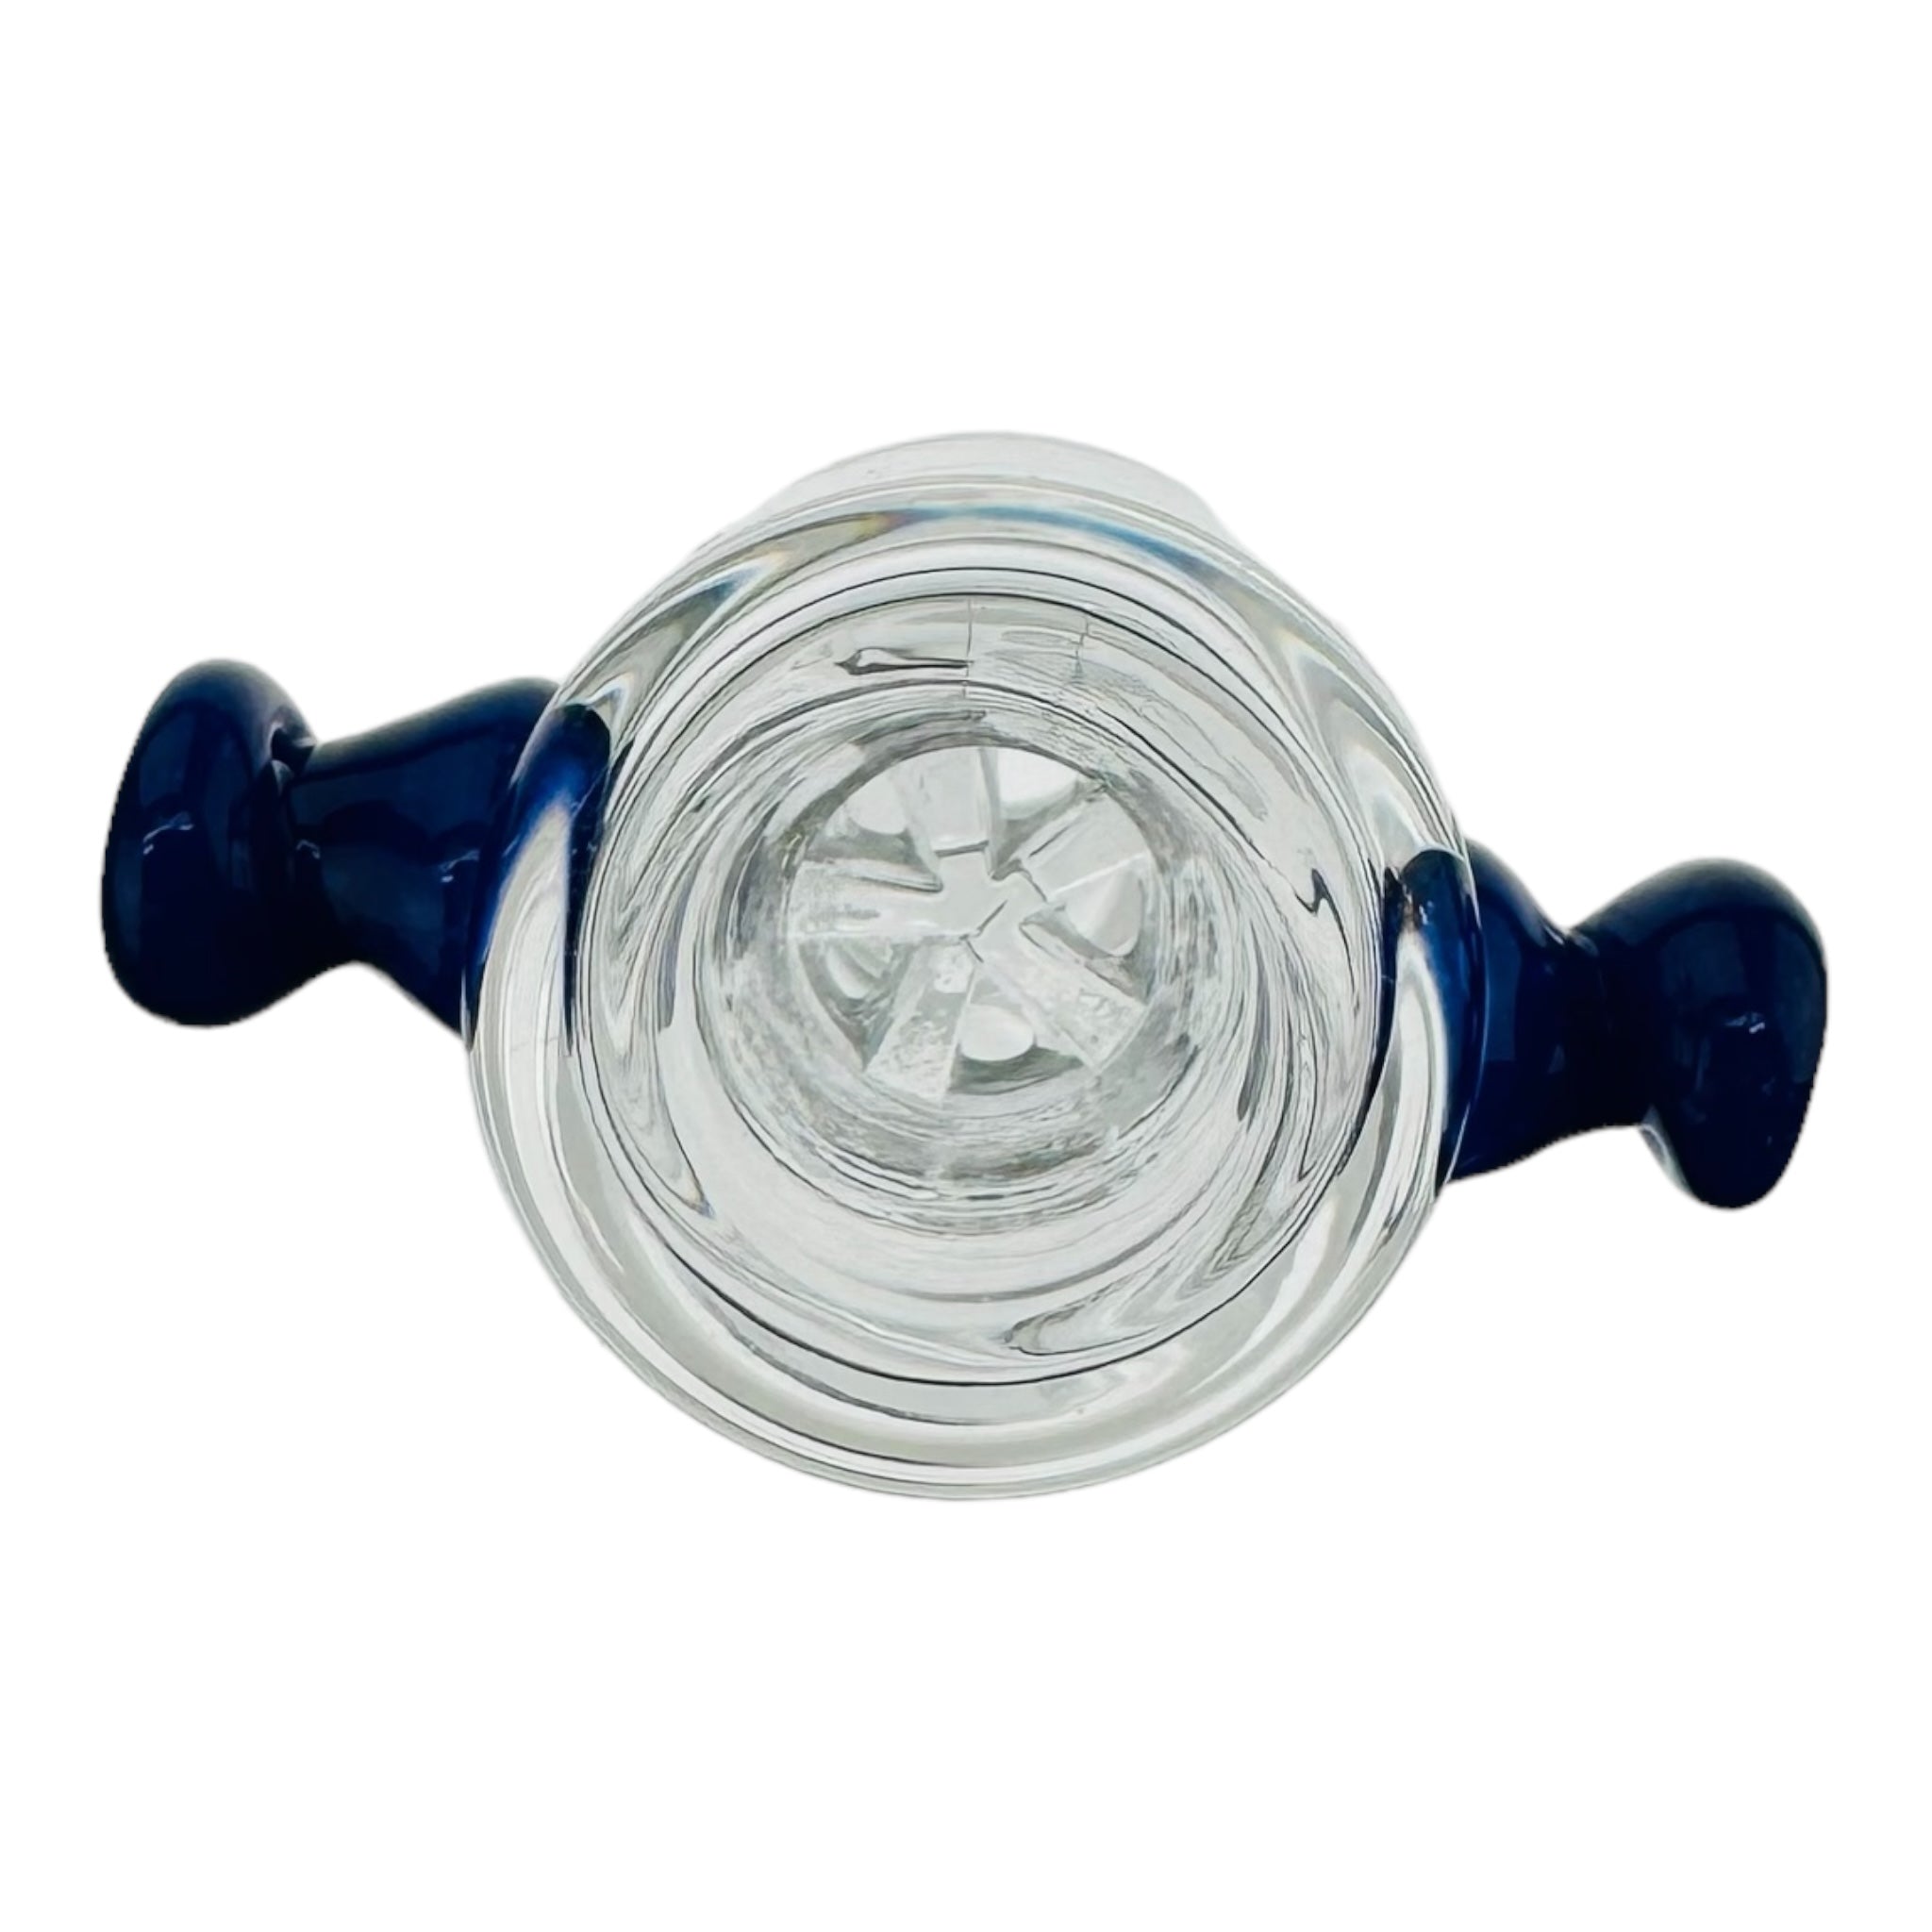 14mm Bong Bowl With Built In Multi Hole Screen Dark Blue Handles for sale